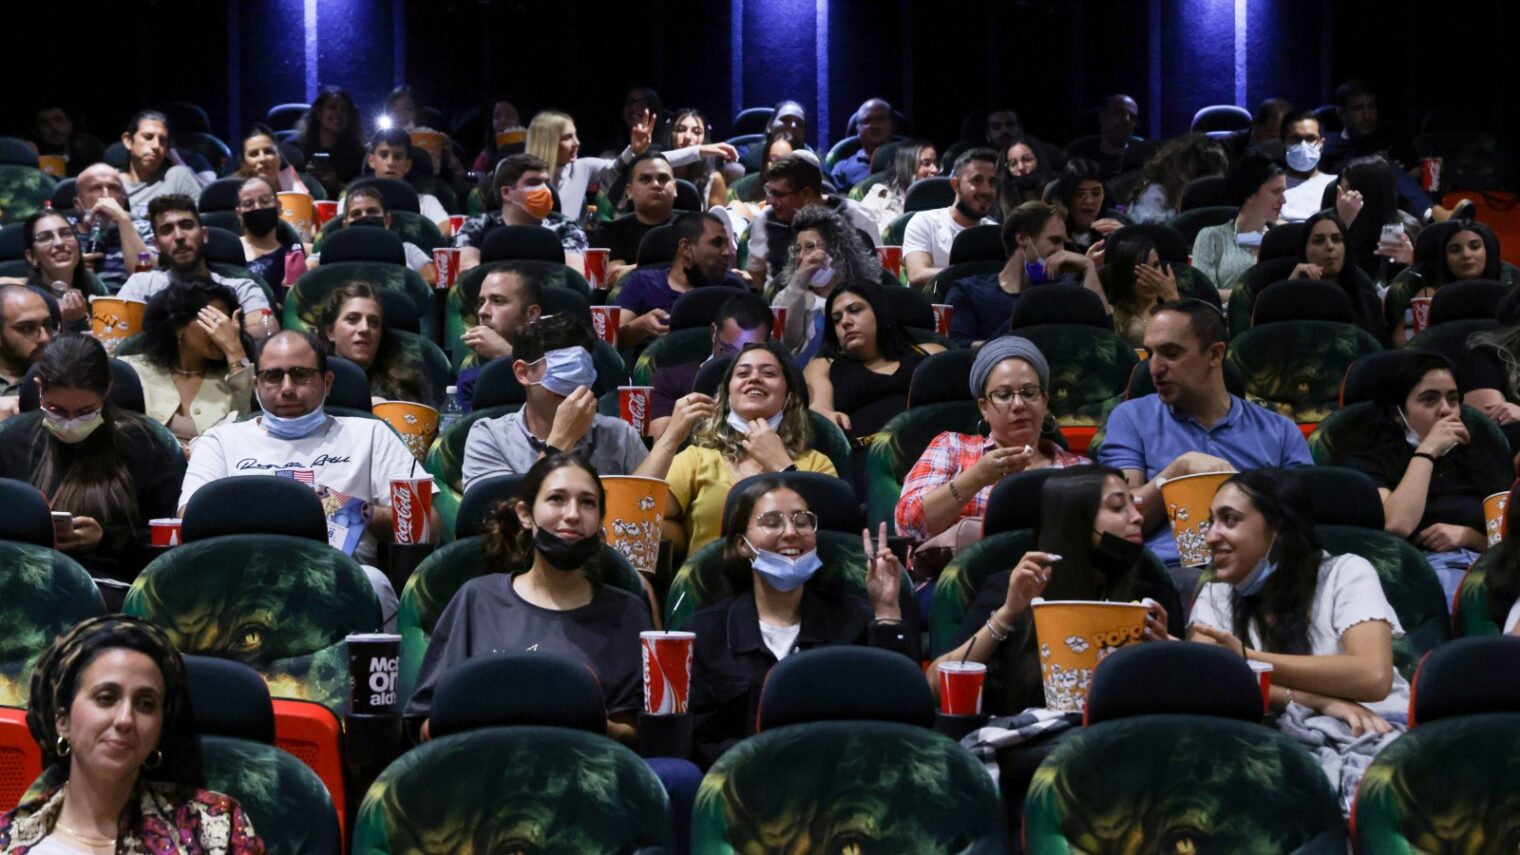 Israelis attend a movie at Cinema City Jerusalem on the official reopening night after 14 months of closure during the coronavirus pandemic. Photo by Olivier Fitoussi/Flash90